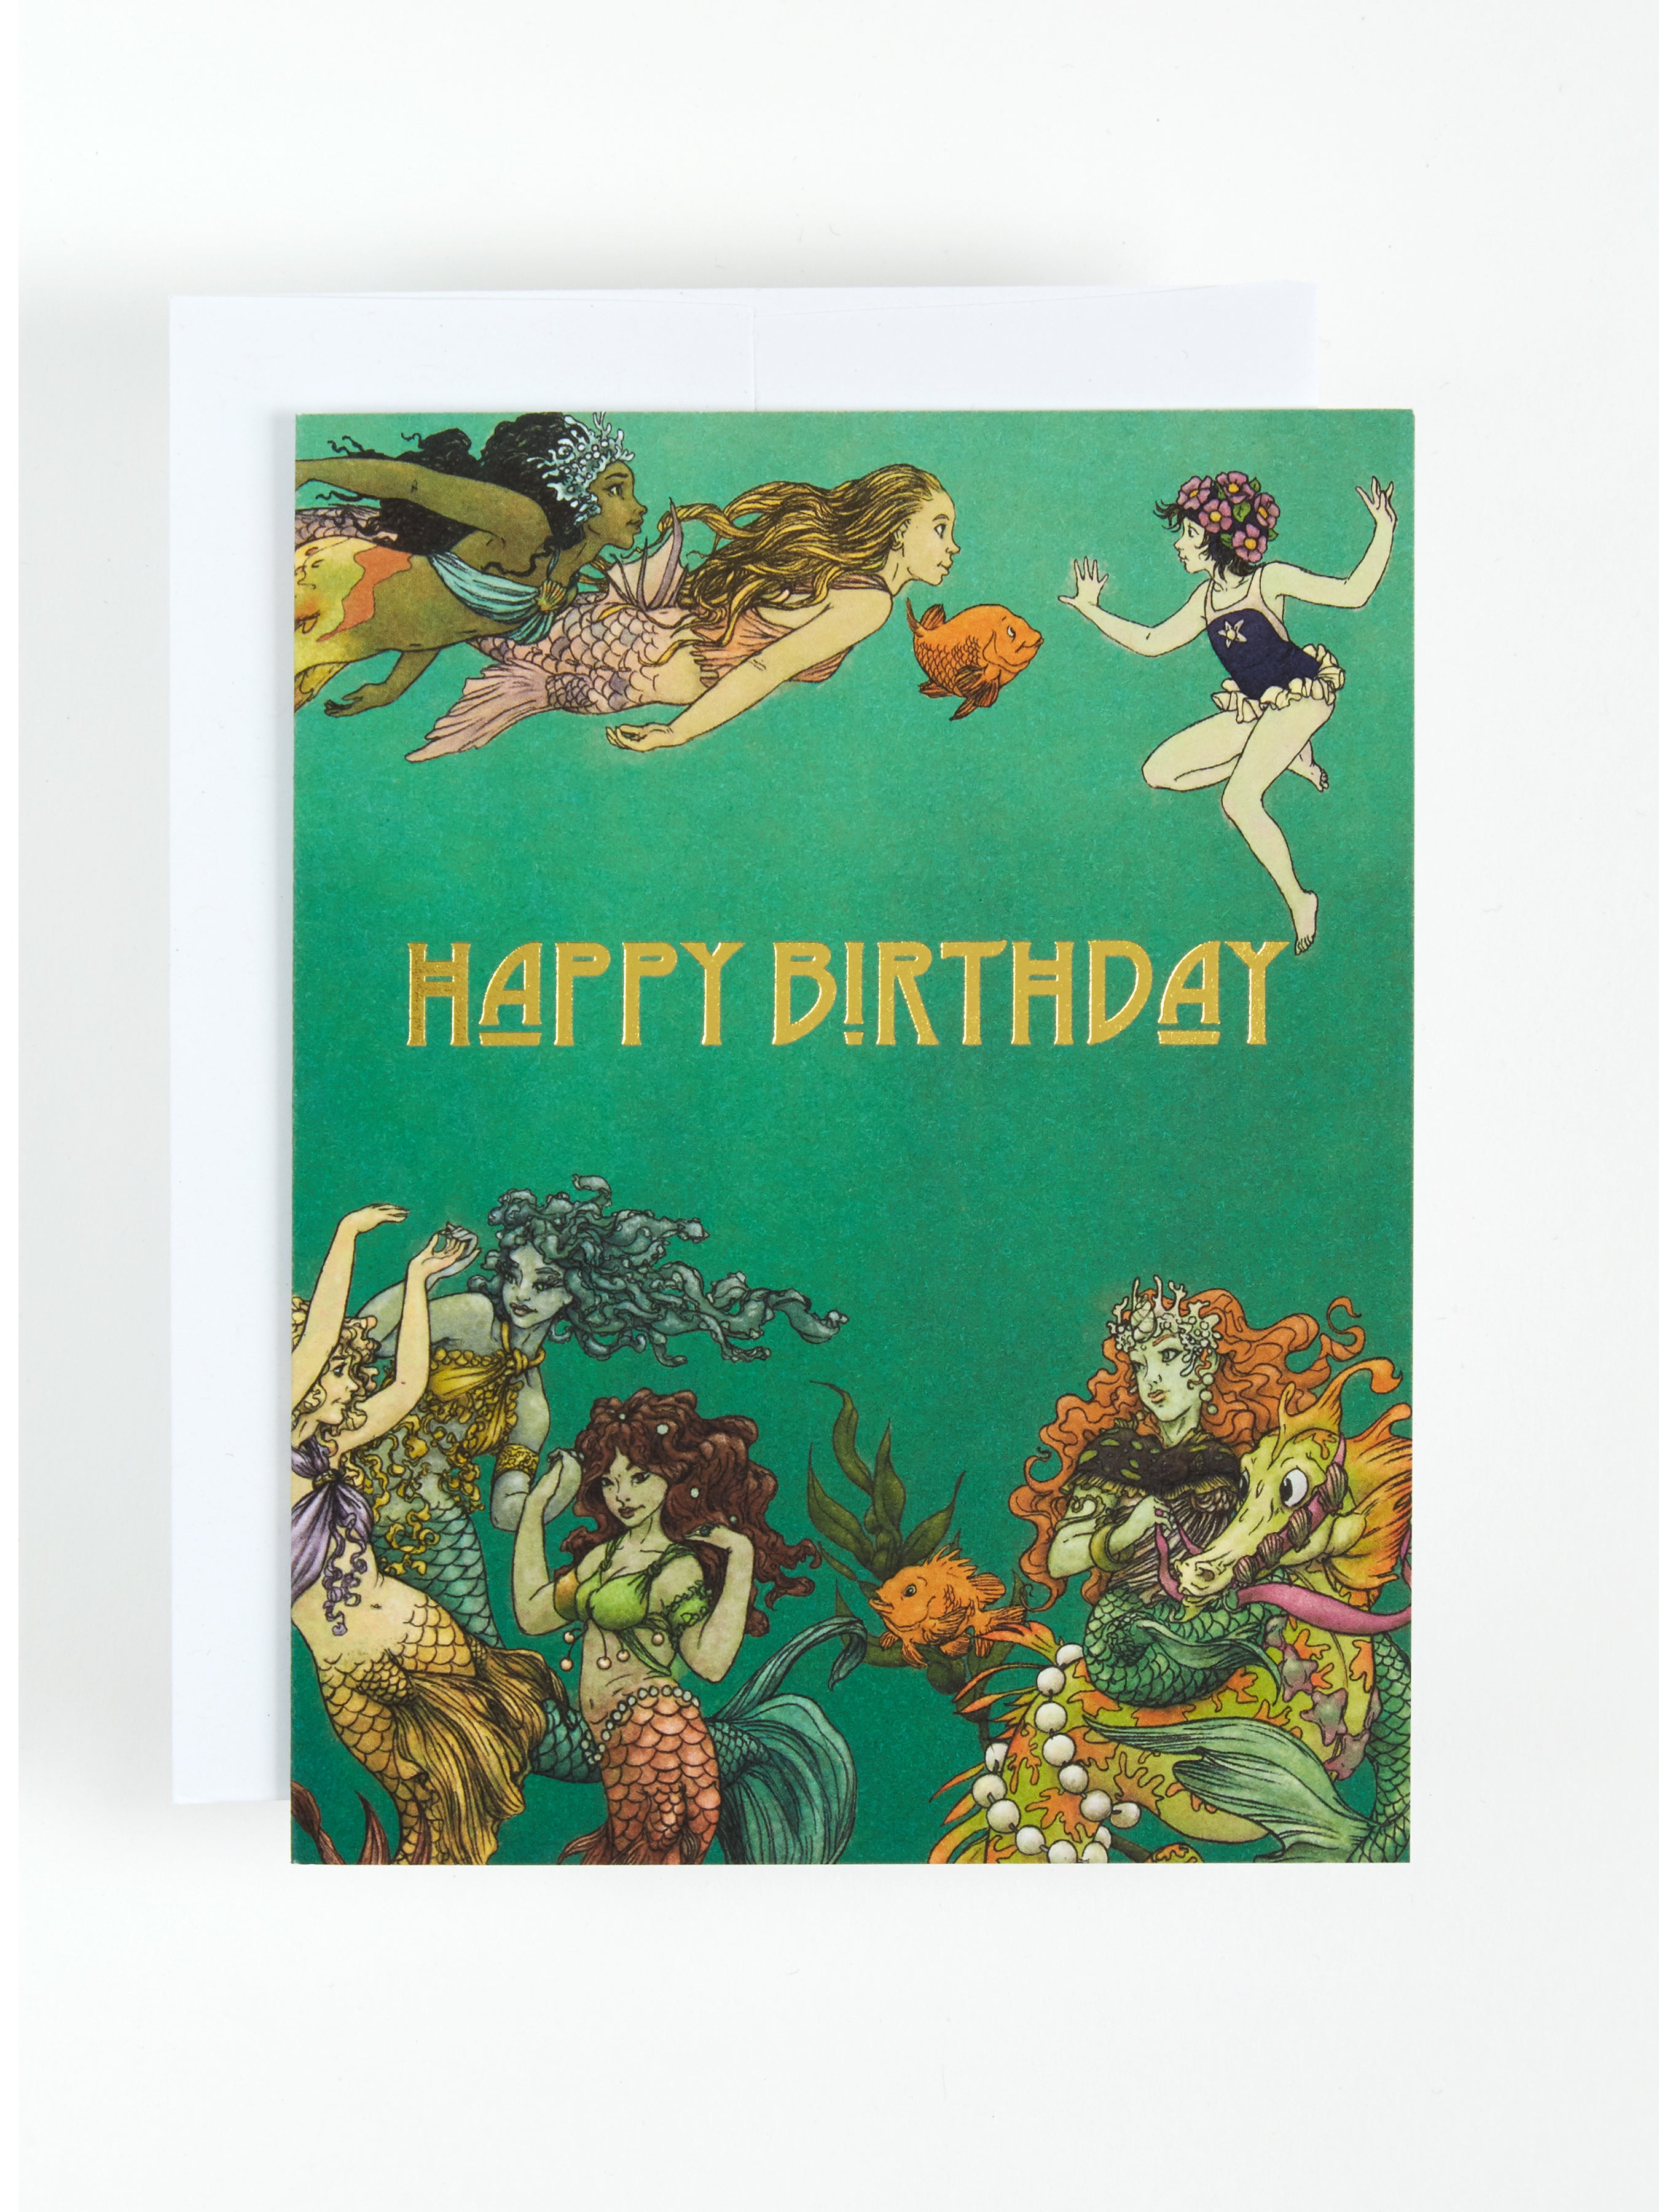 Greeting card with the text Happy Birthday and beautiful mermaids underwater